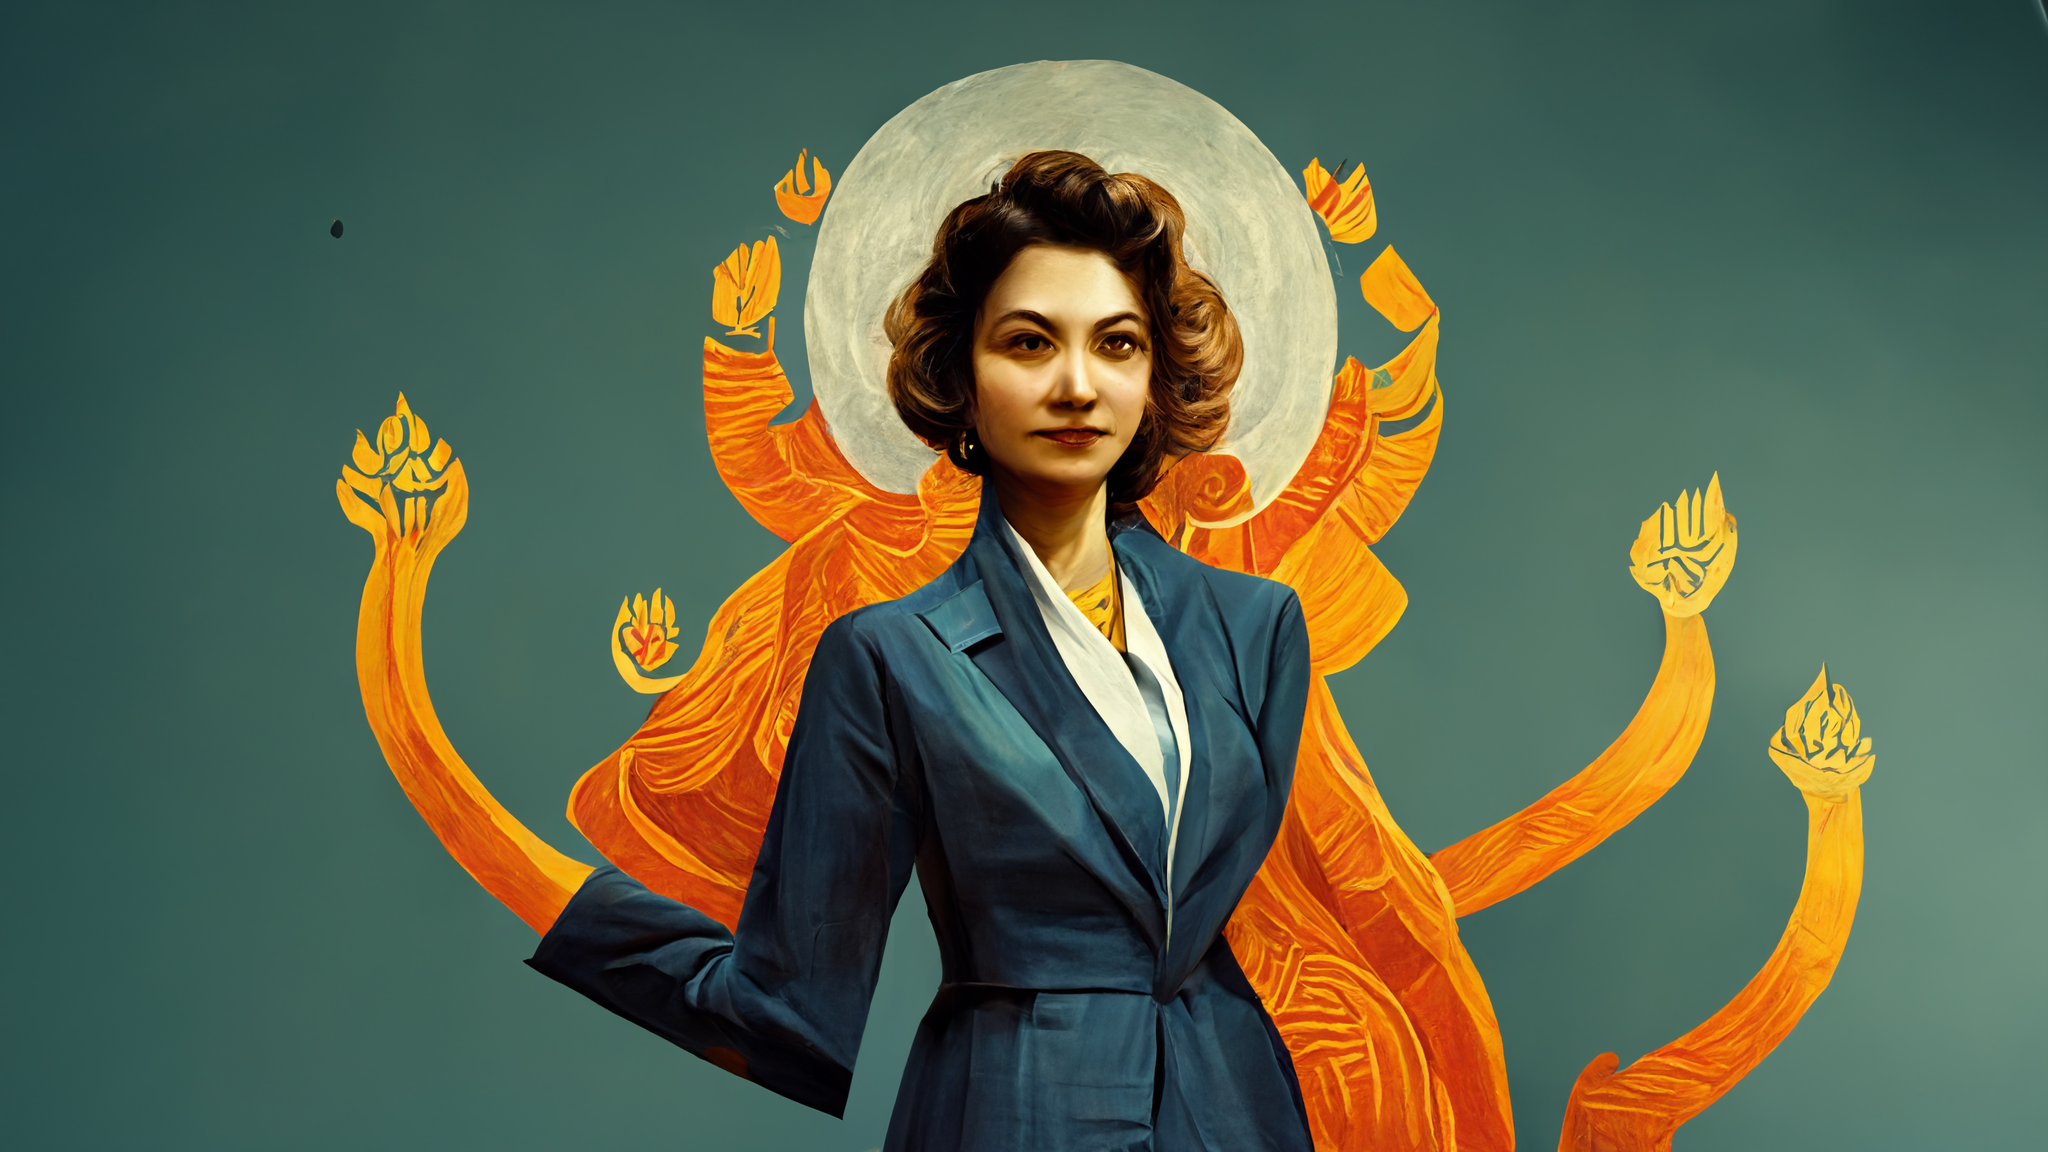 Strong Independent Woman with Ten Hands like the Goddess Durga Midjourney Sexism in Ads